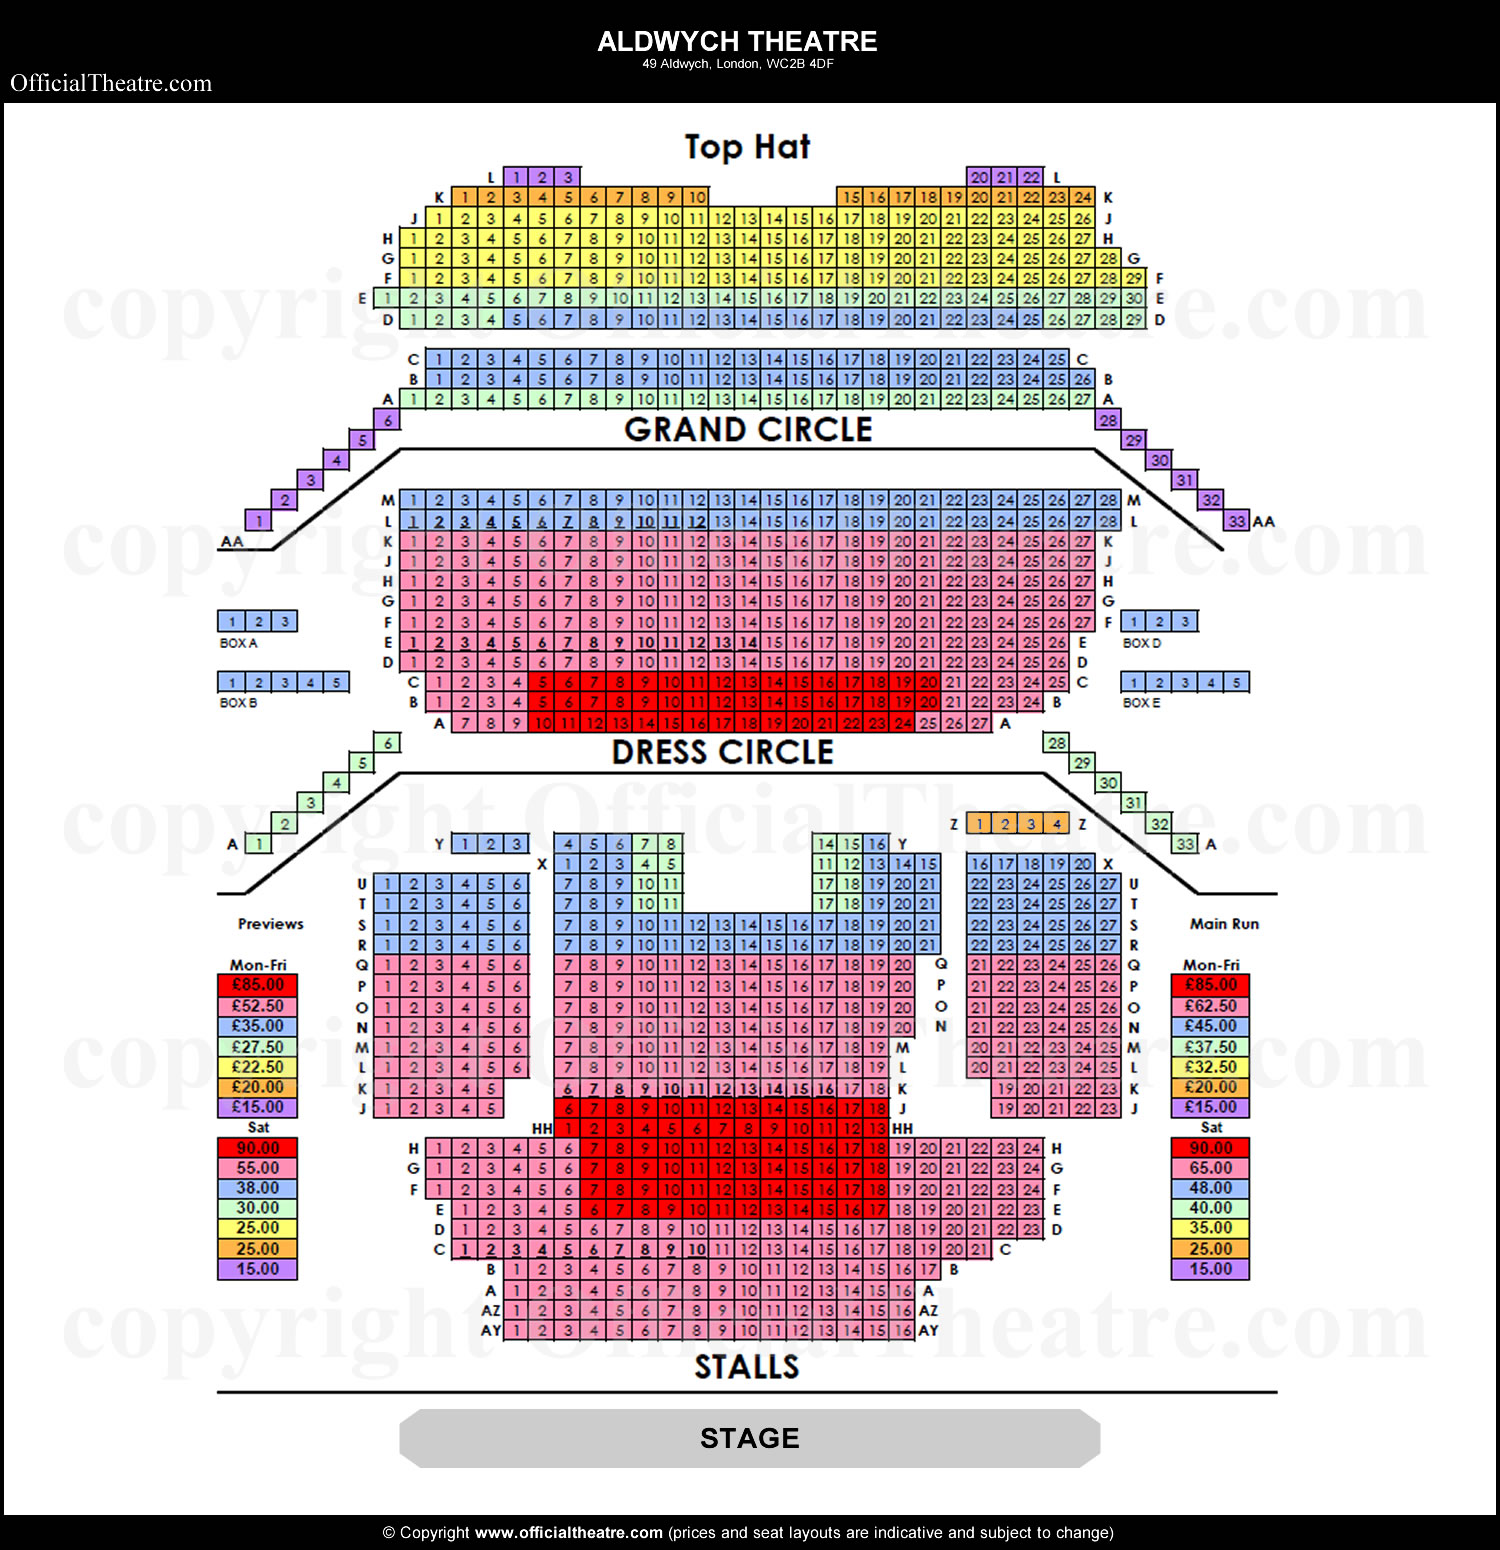 Aldwych Theatre Seat Prices 